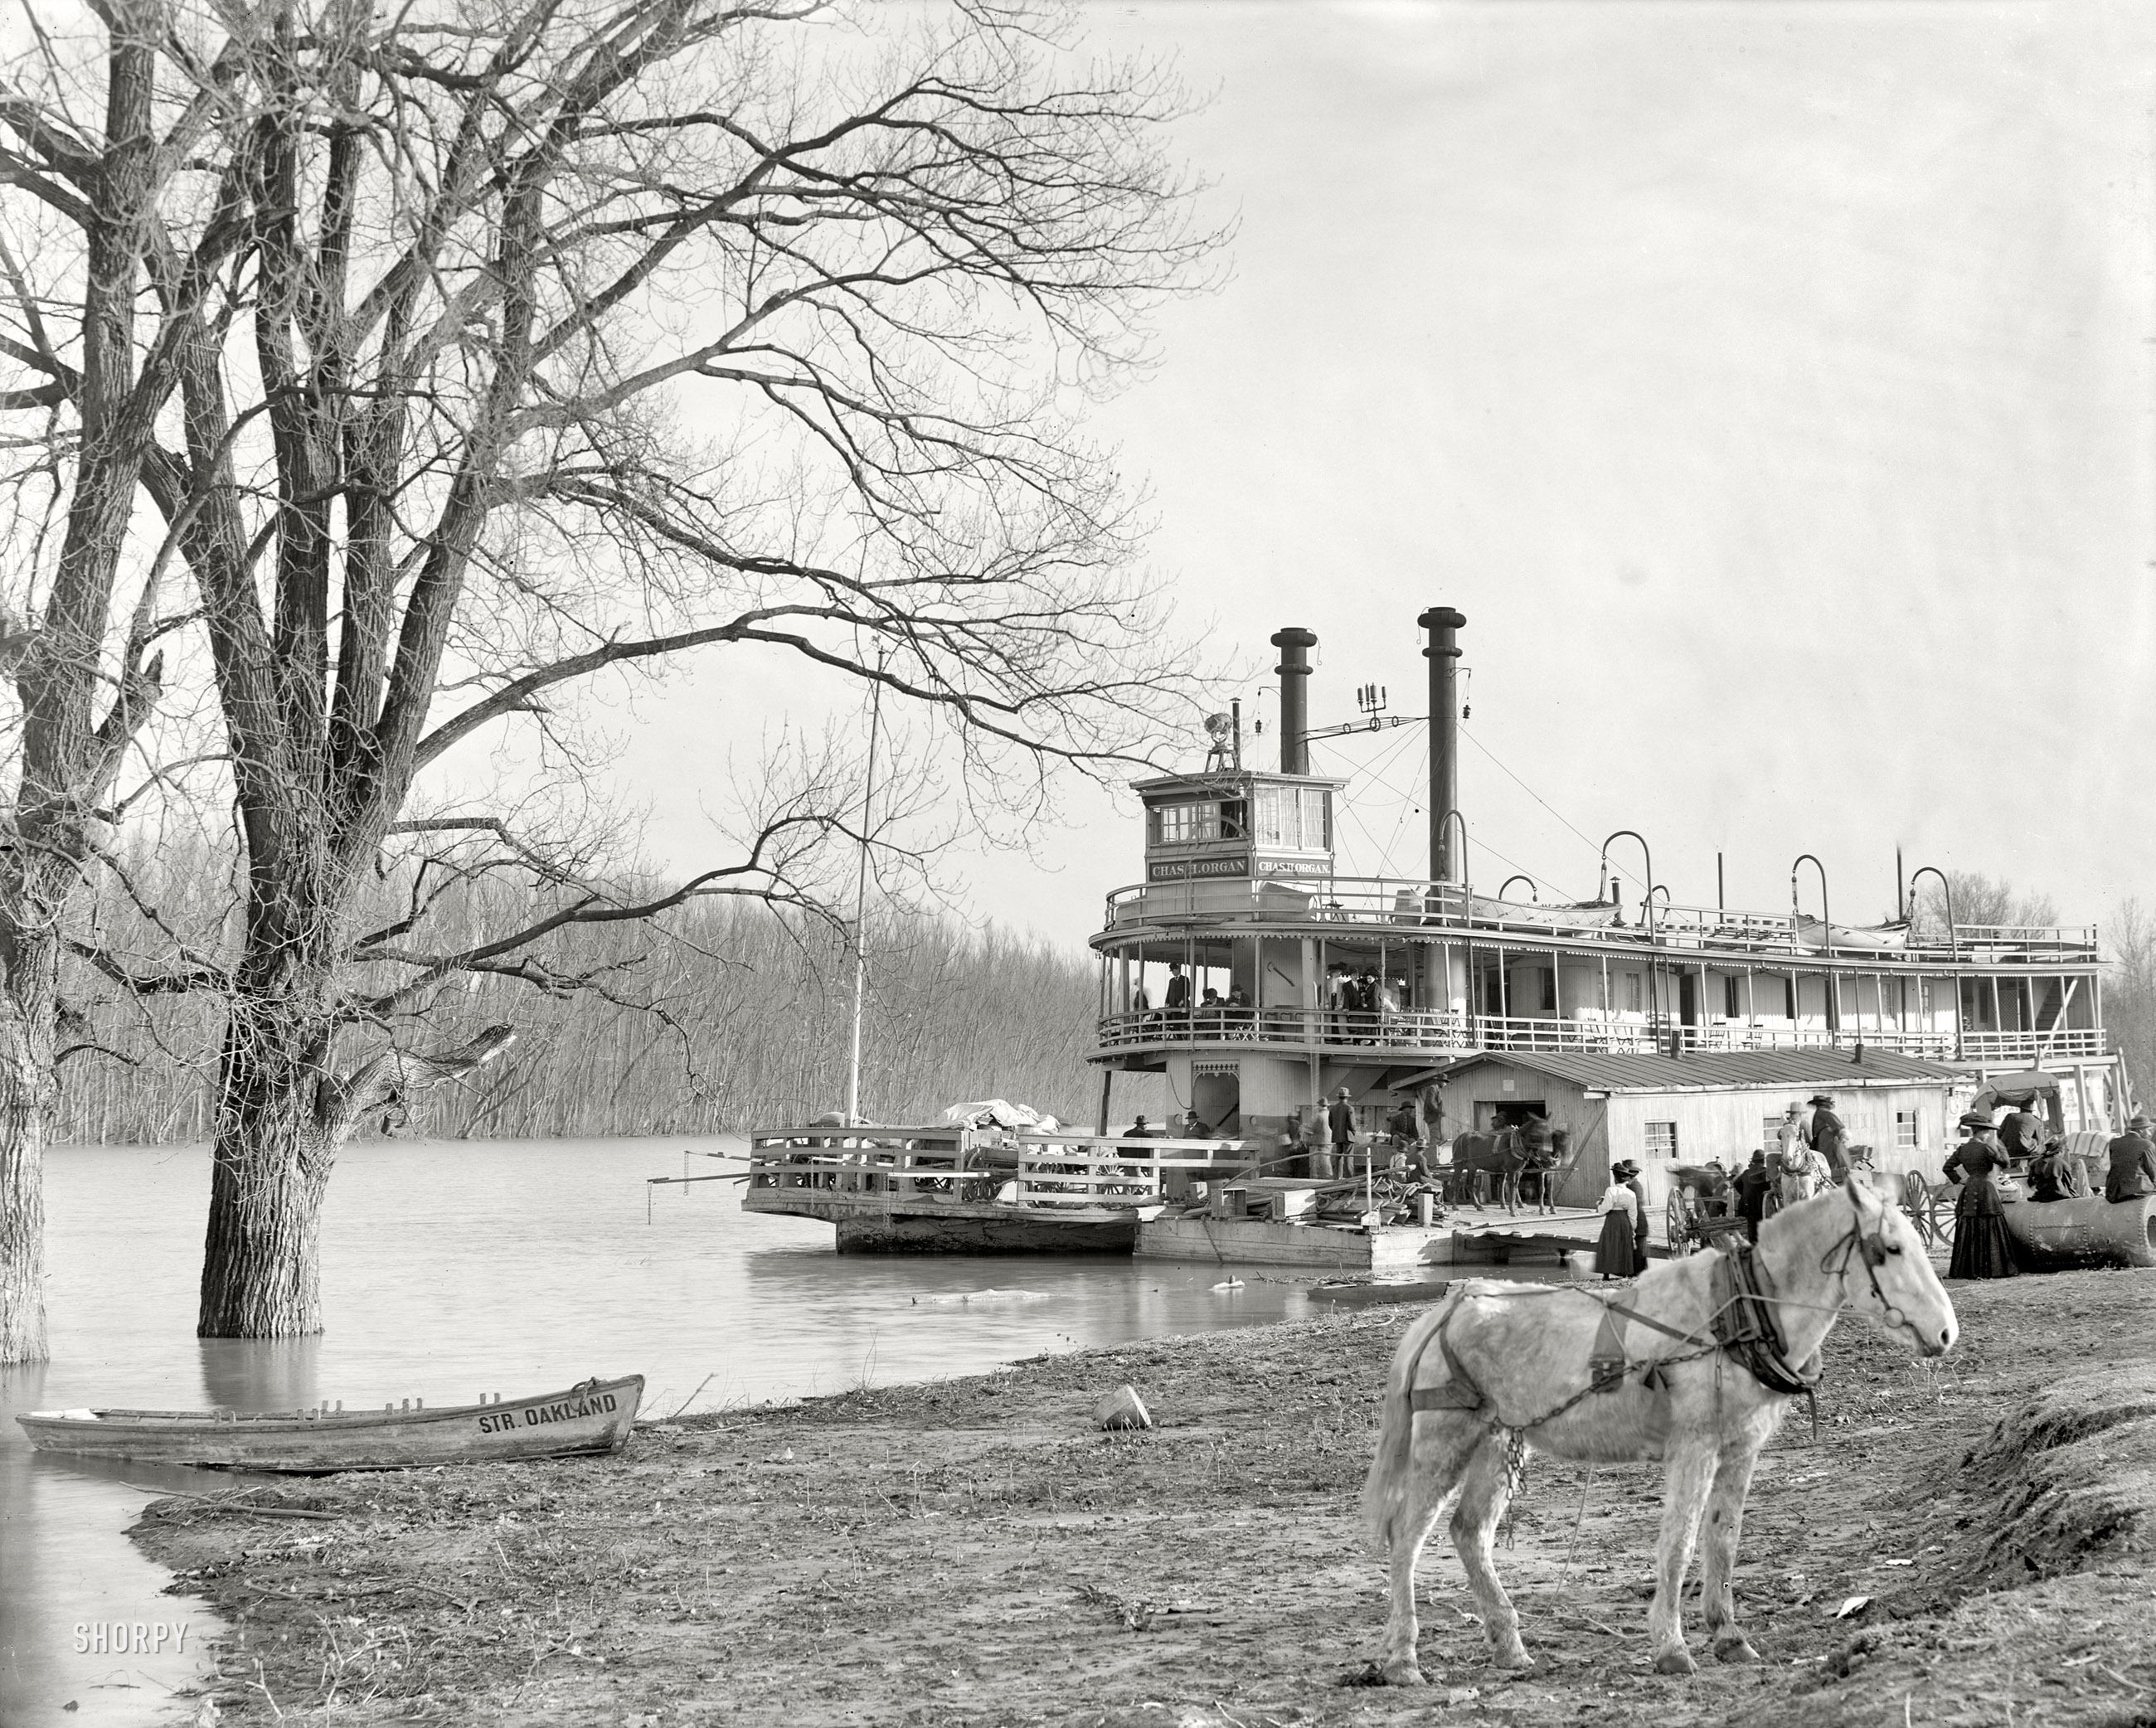 Memphis, Tennessee, circa 1910. "River packet Charles H. Organ landing at Mound City." 8x10 glass negative, Detroit Publishing Co. View full size.